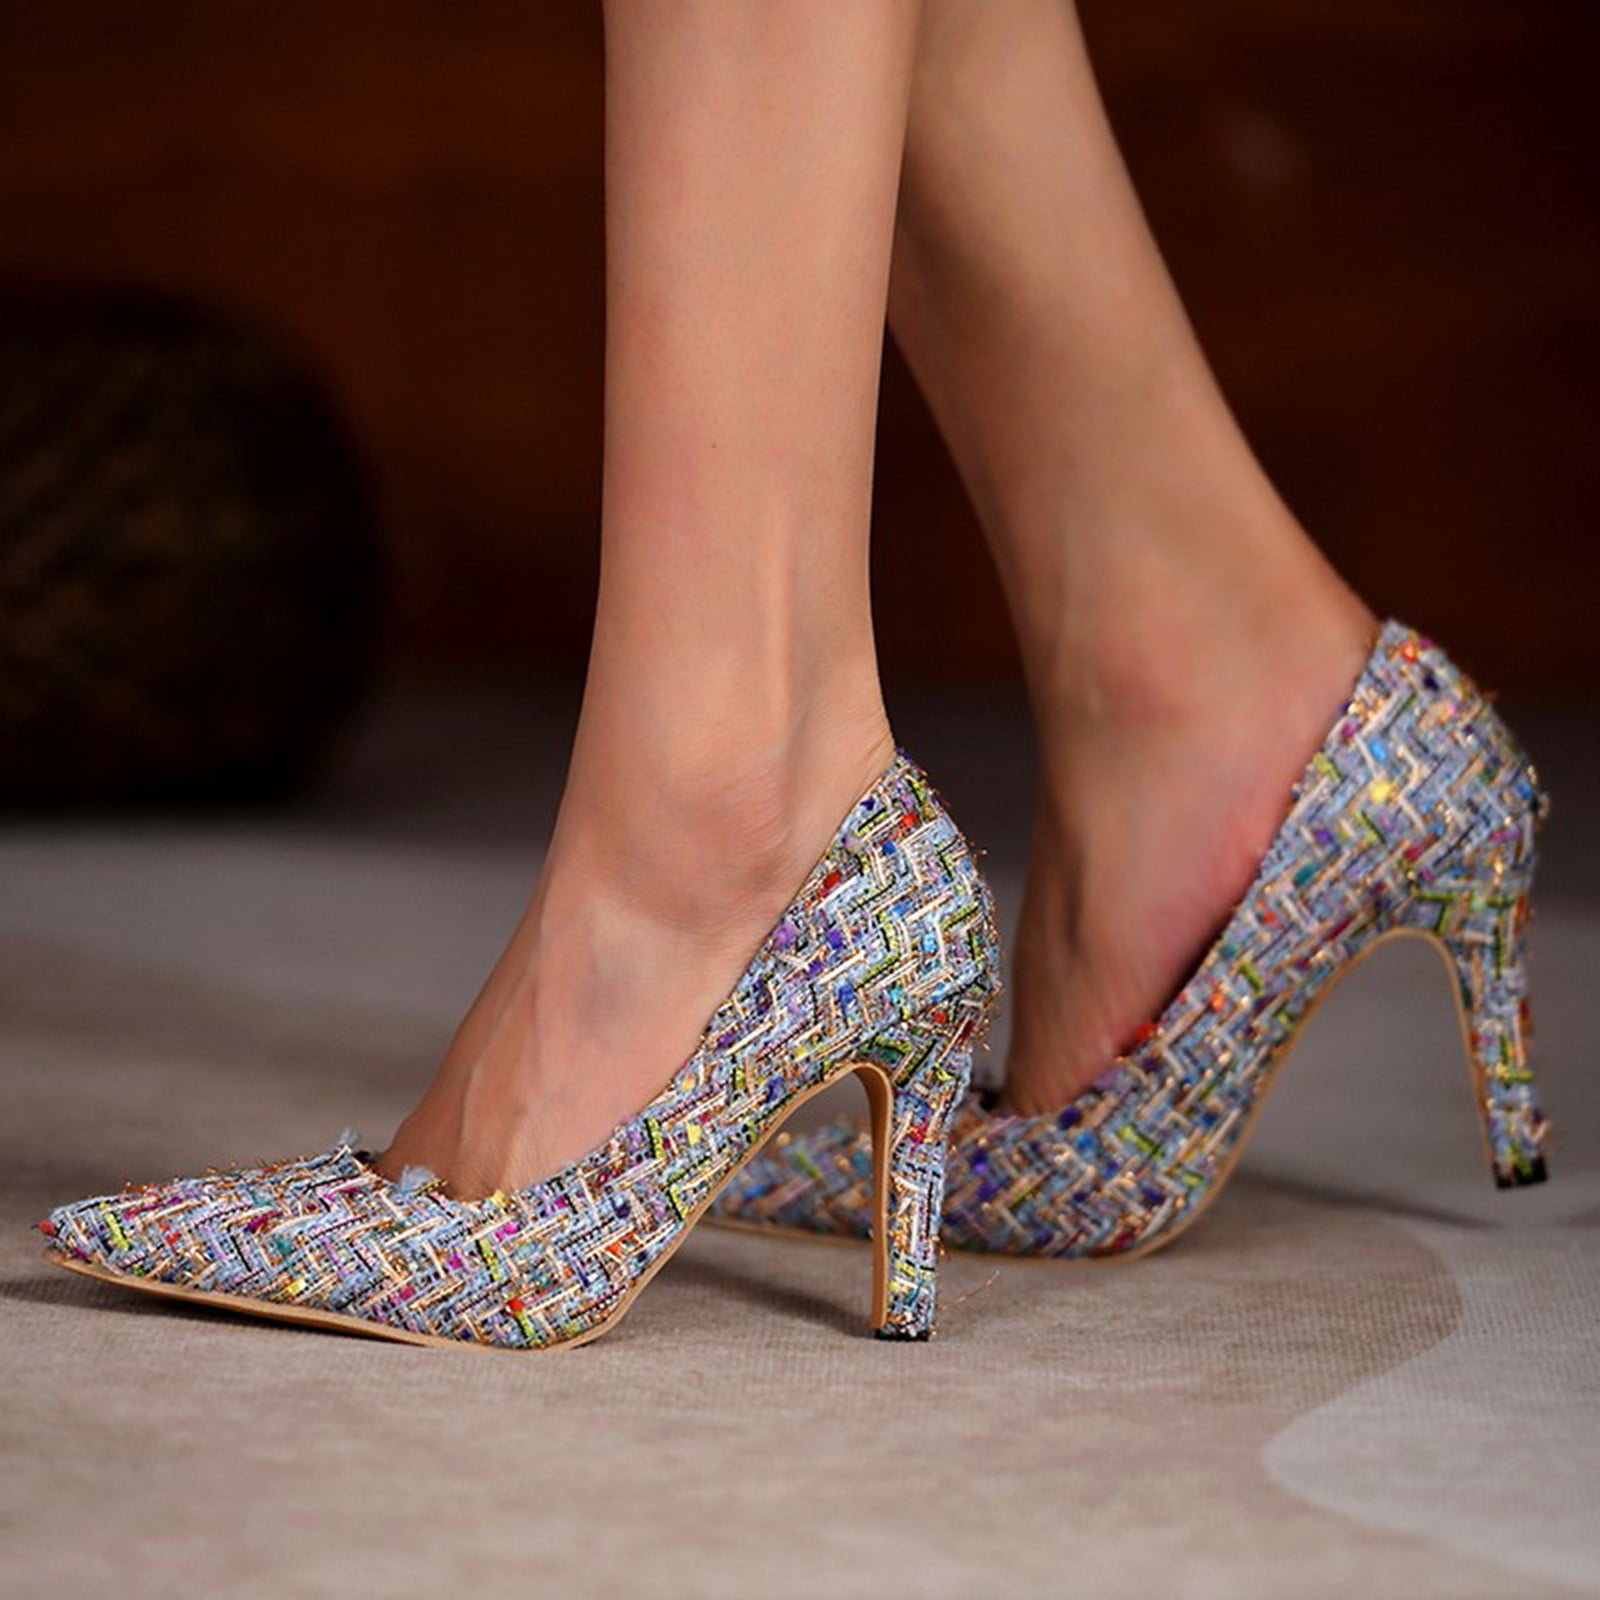 Crystal Pointed Tow High Heels Multi Color Bohemian Wedding Shoes With  Buckle Straps For Bridesmaids 3 Inches US Size 10.5 2021 From Nancy1984,  $62.99 | DHgate.Com